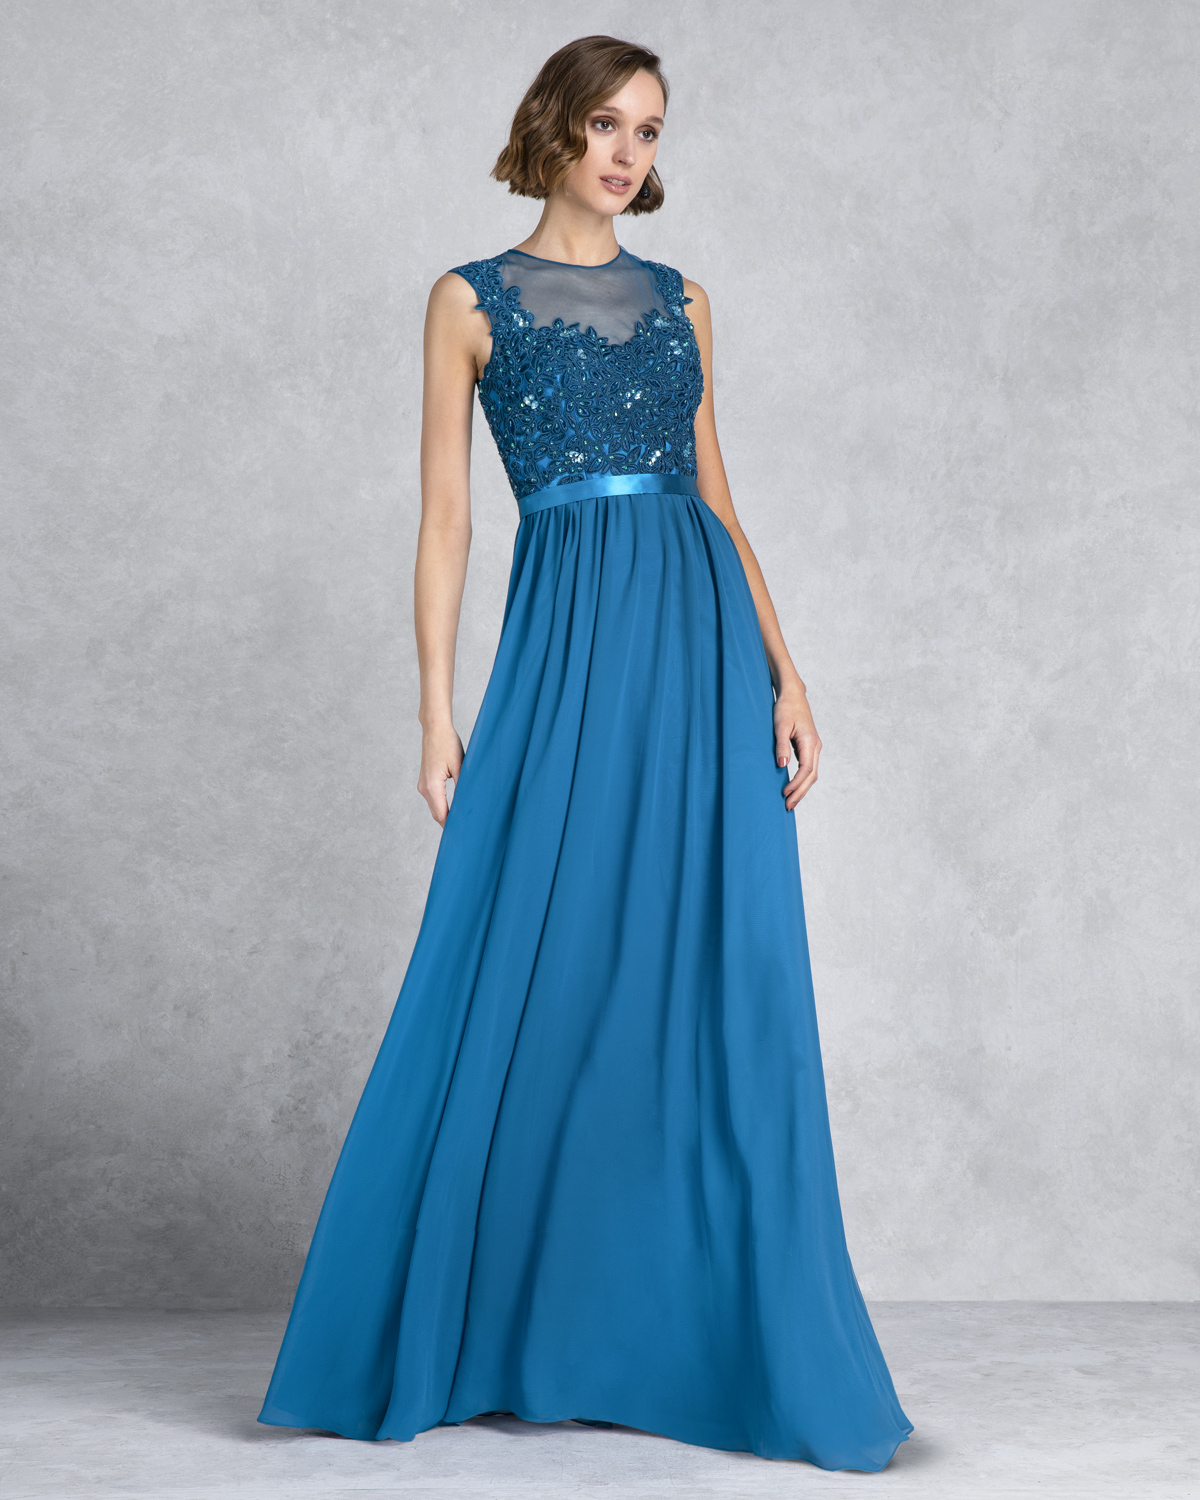 Классические платья / Long evening dress with lace on the top and chifon skirt